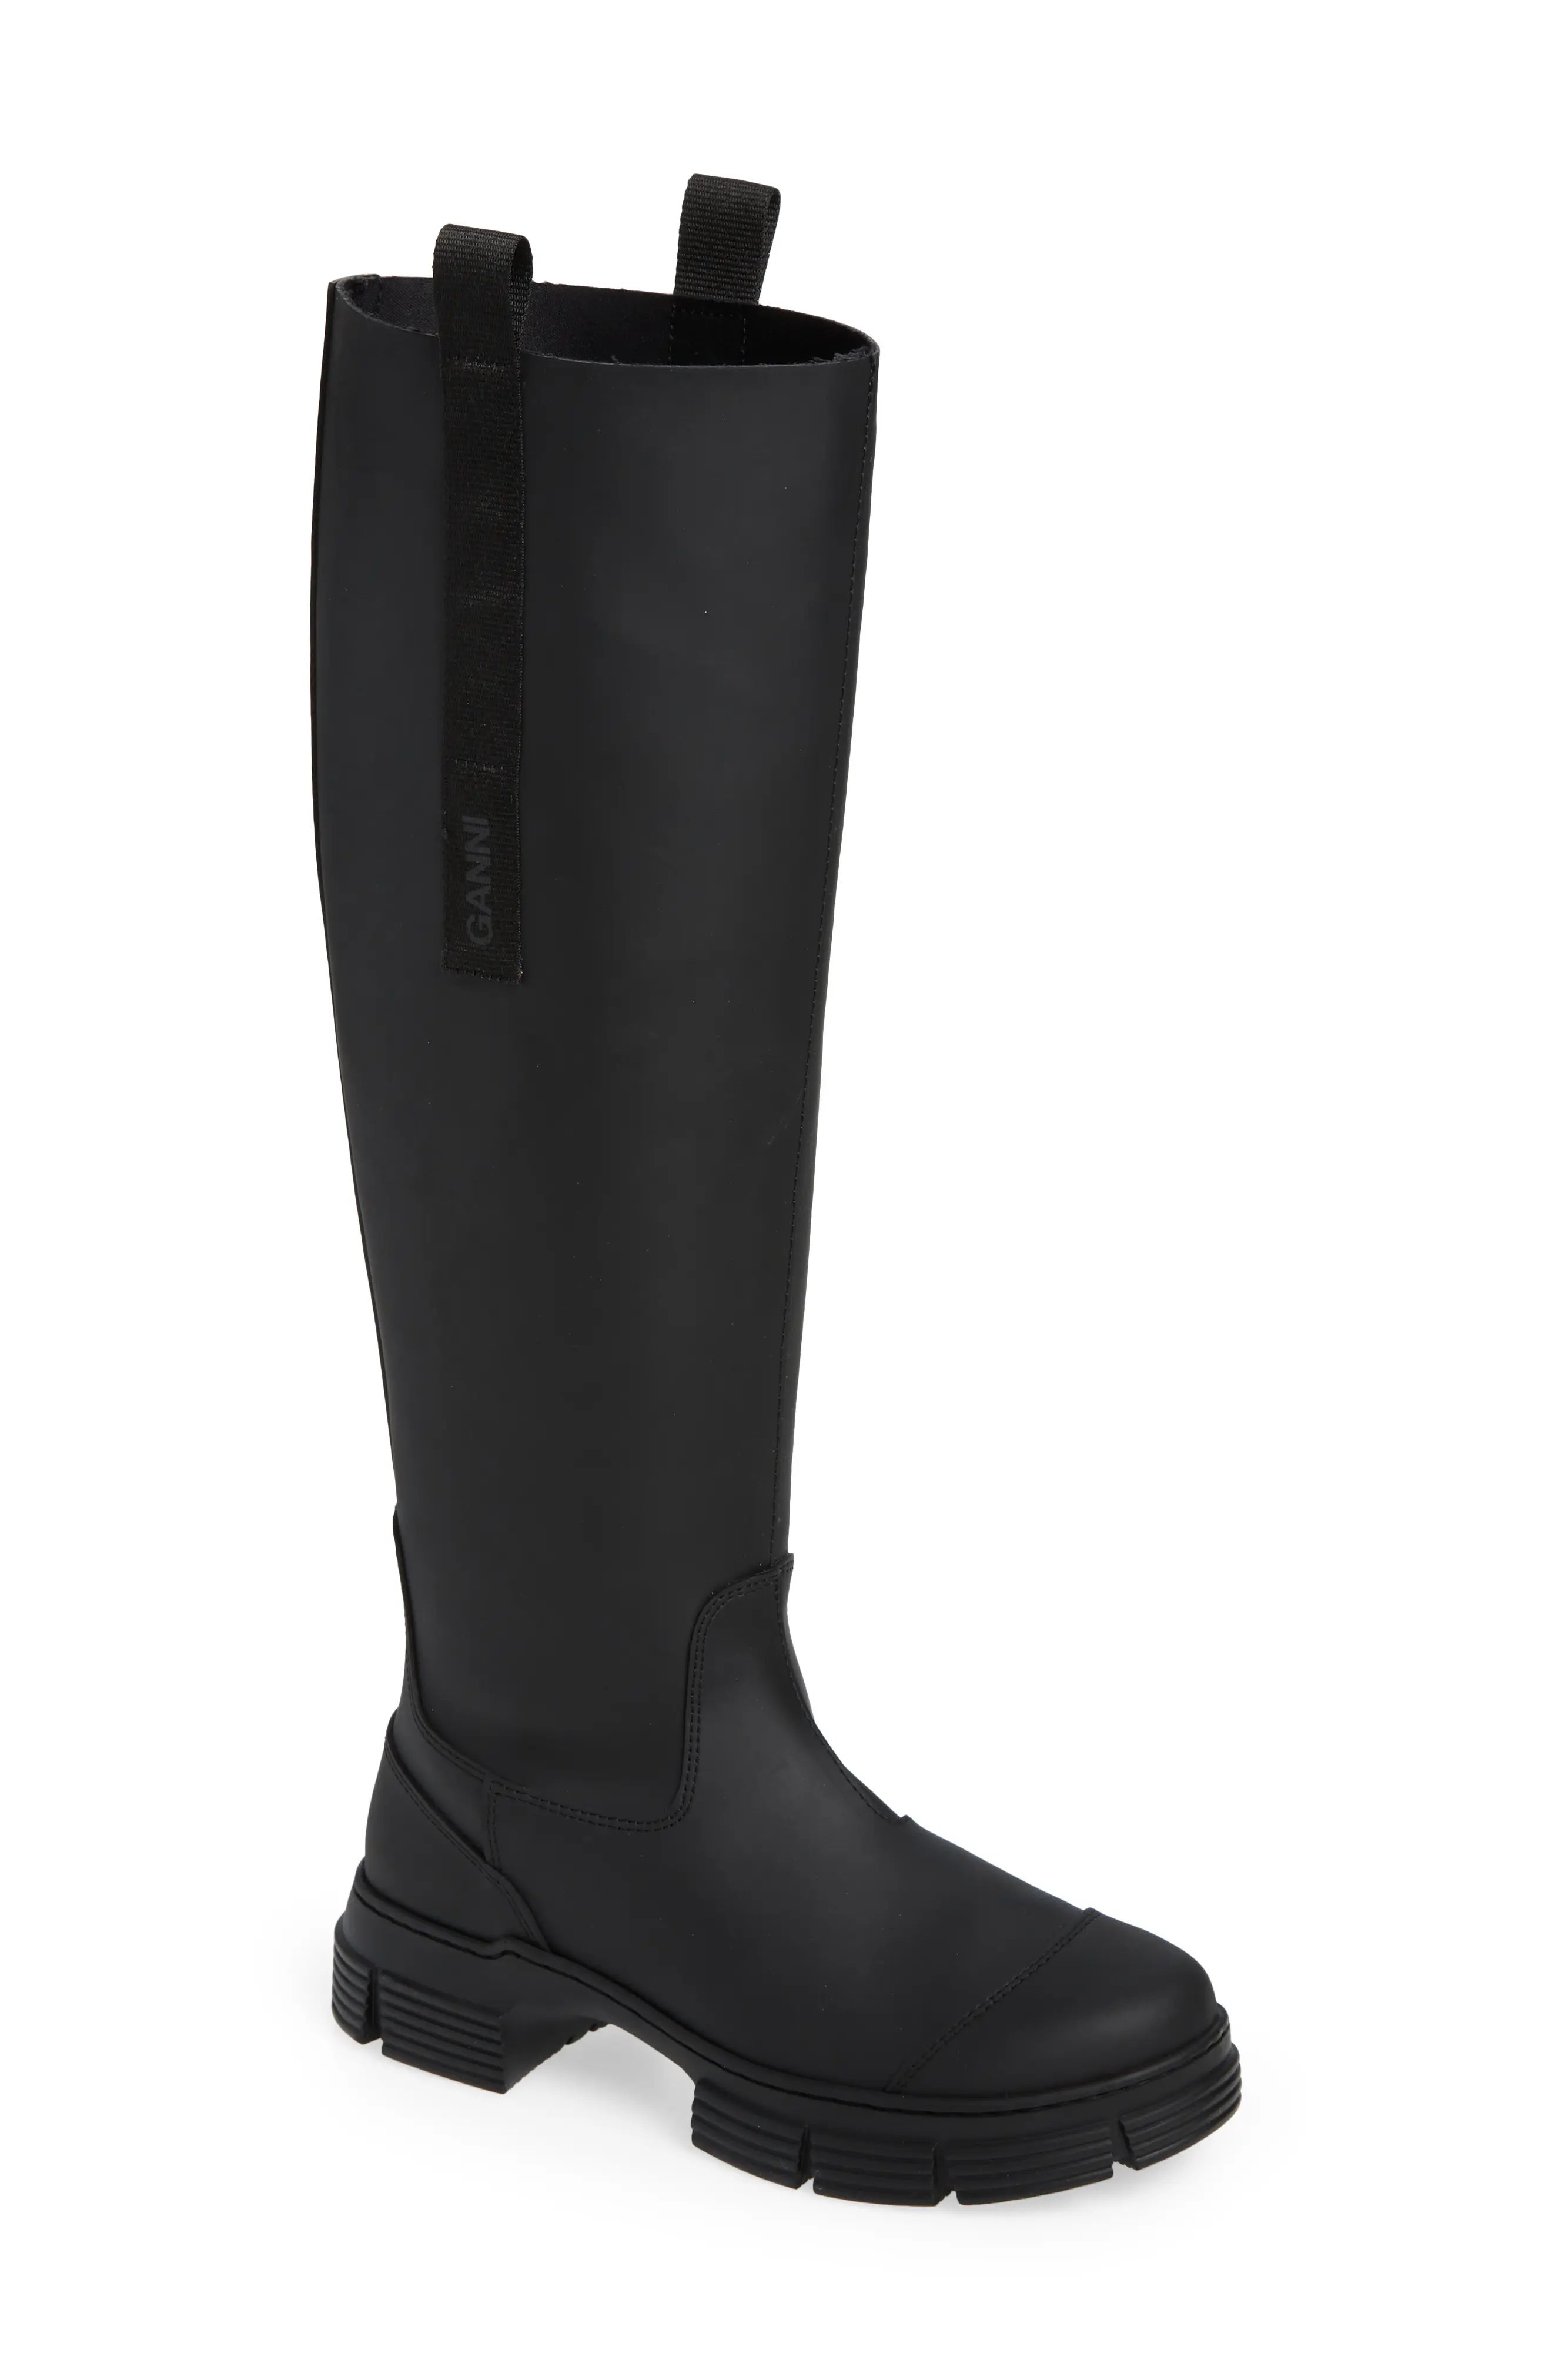 Women's Ganni Recycled Rubber Country Boot, Size 5US - Black | Nordstrom